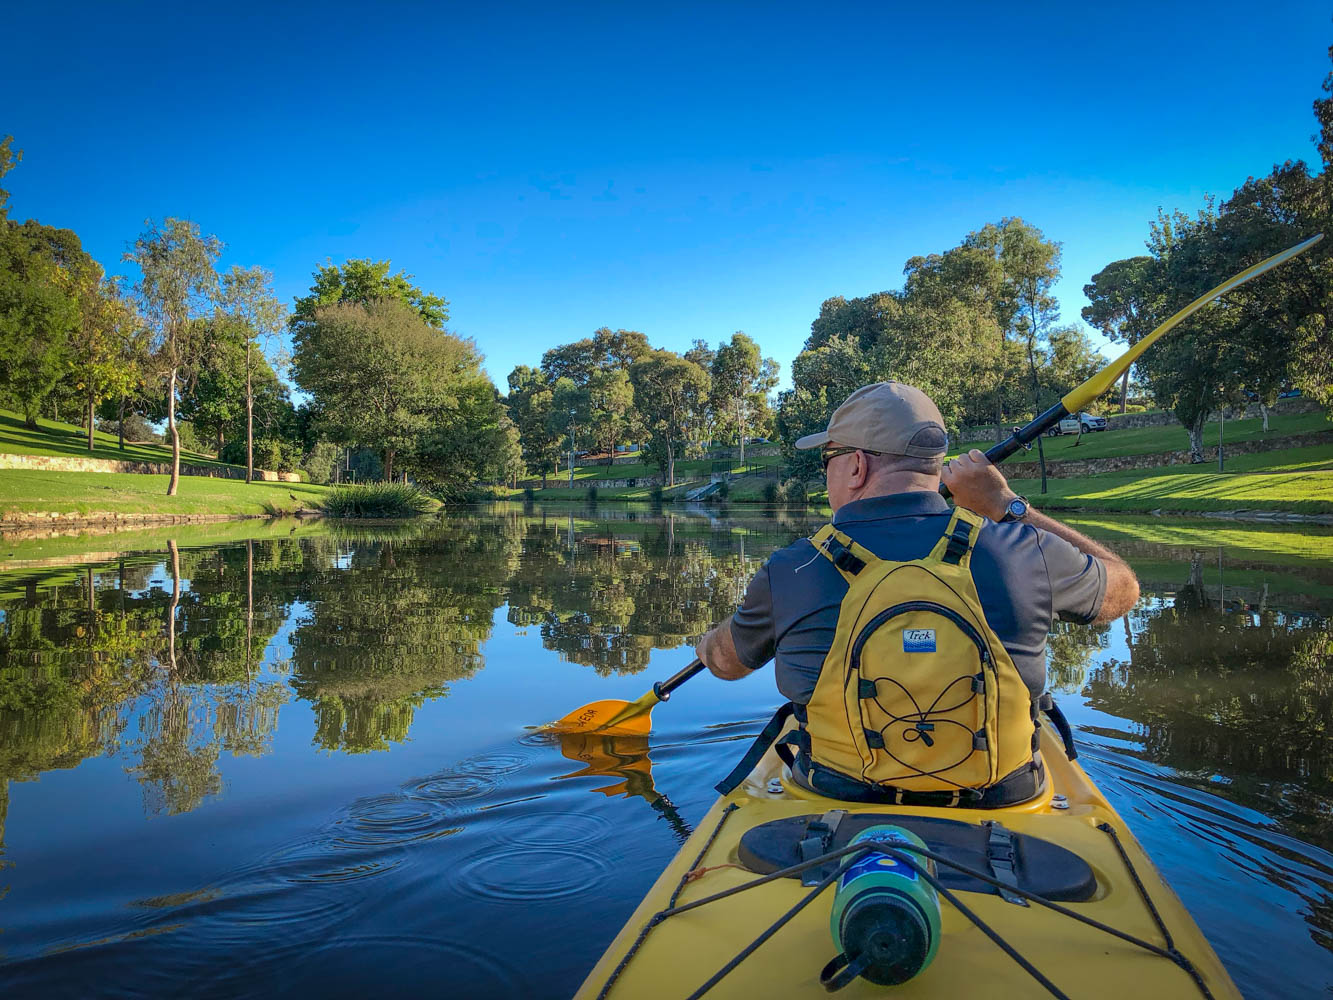 Kayaking the City - An Adventure on The Torrens